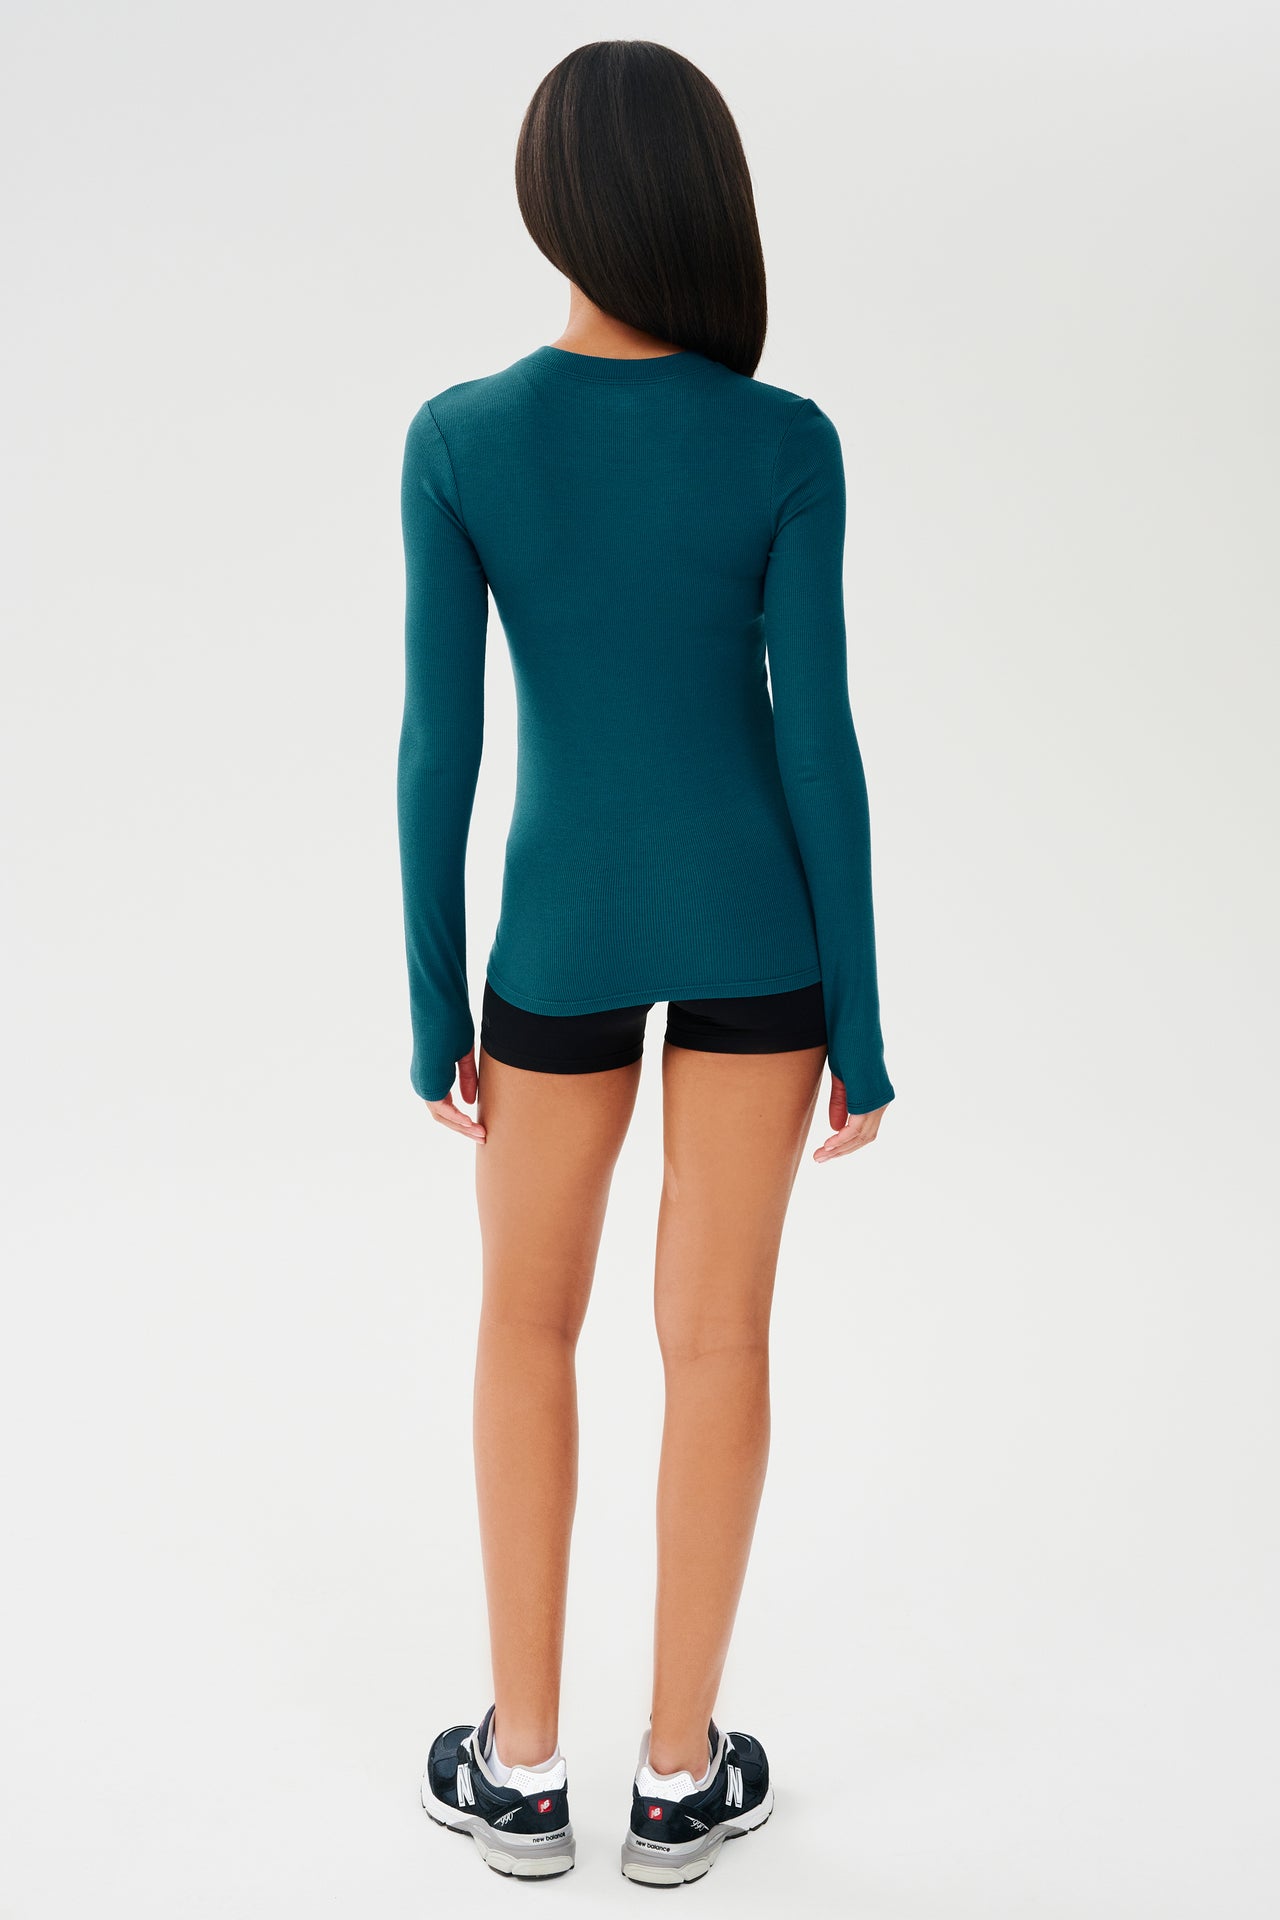 The back view of a woman wearing a SPLITS59 Louise Rib Long Sleeve - Peacock top made of modal and spandex.